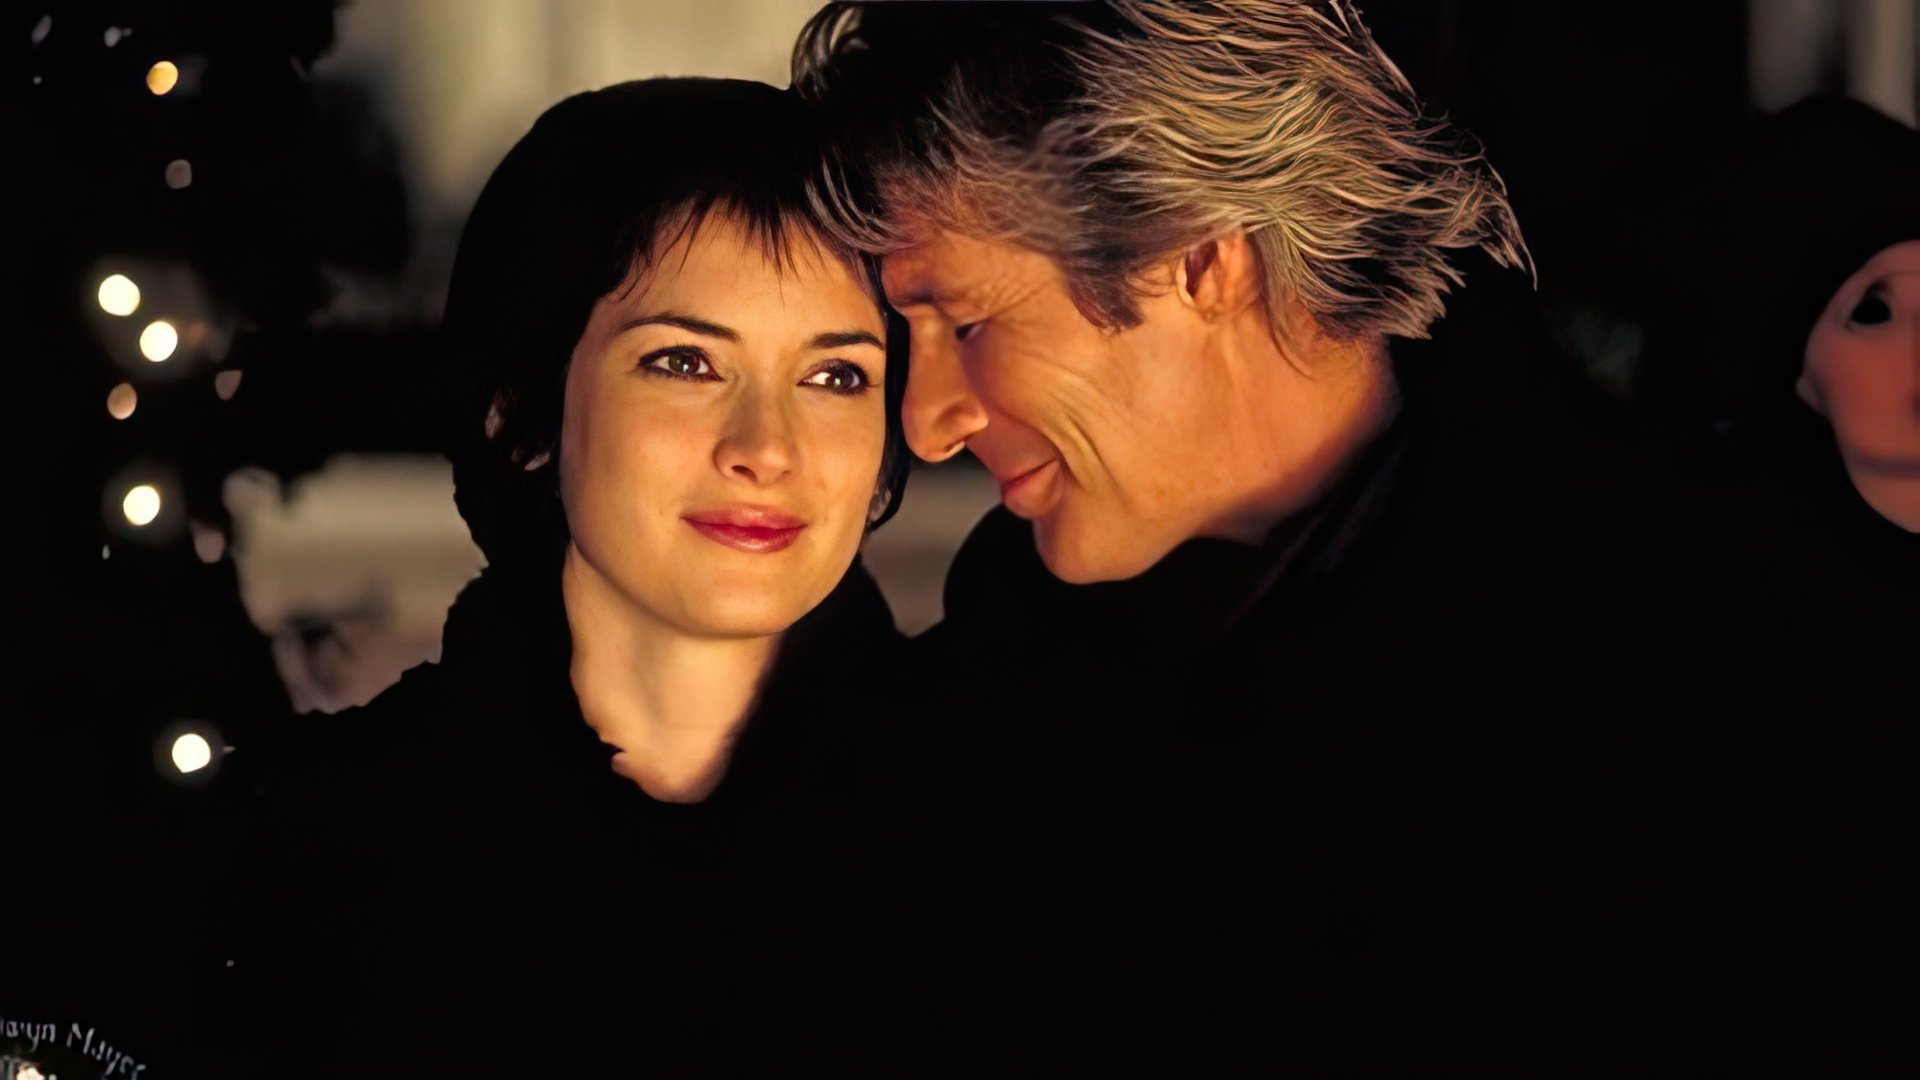 In the photo: Richard Gere and Winona Ryder